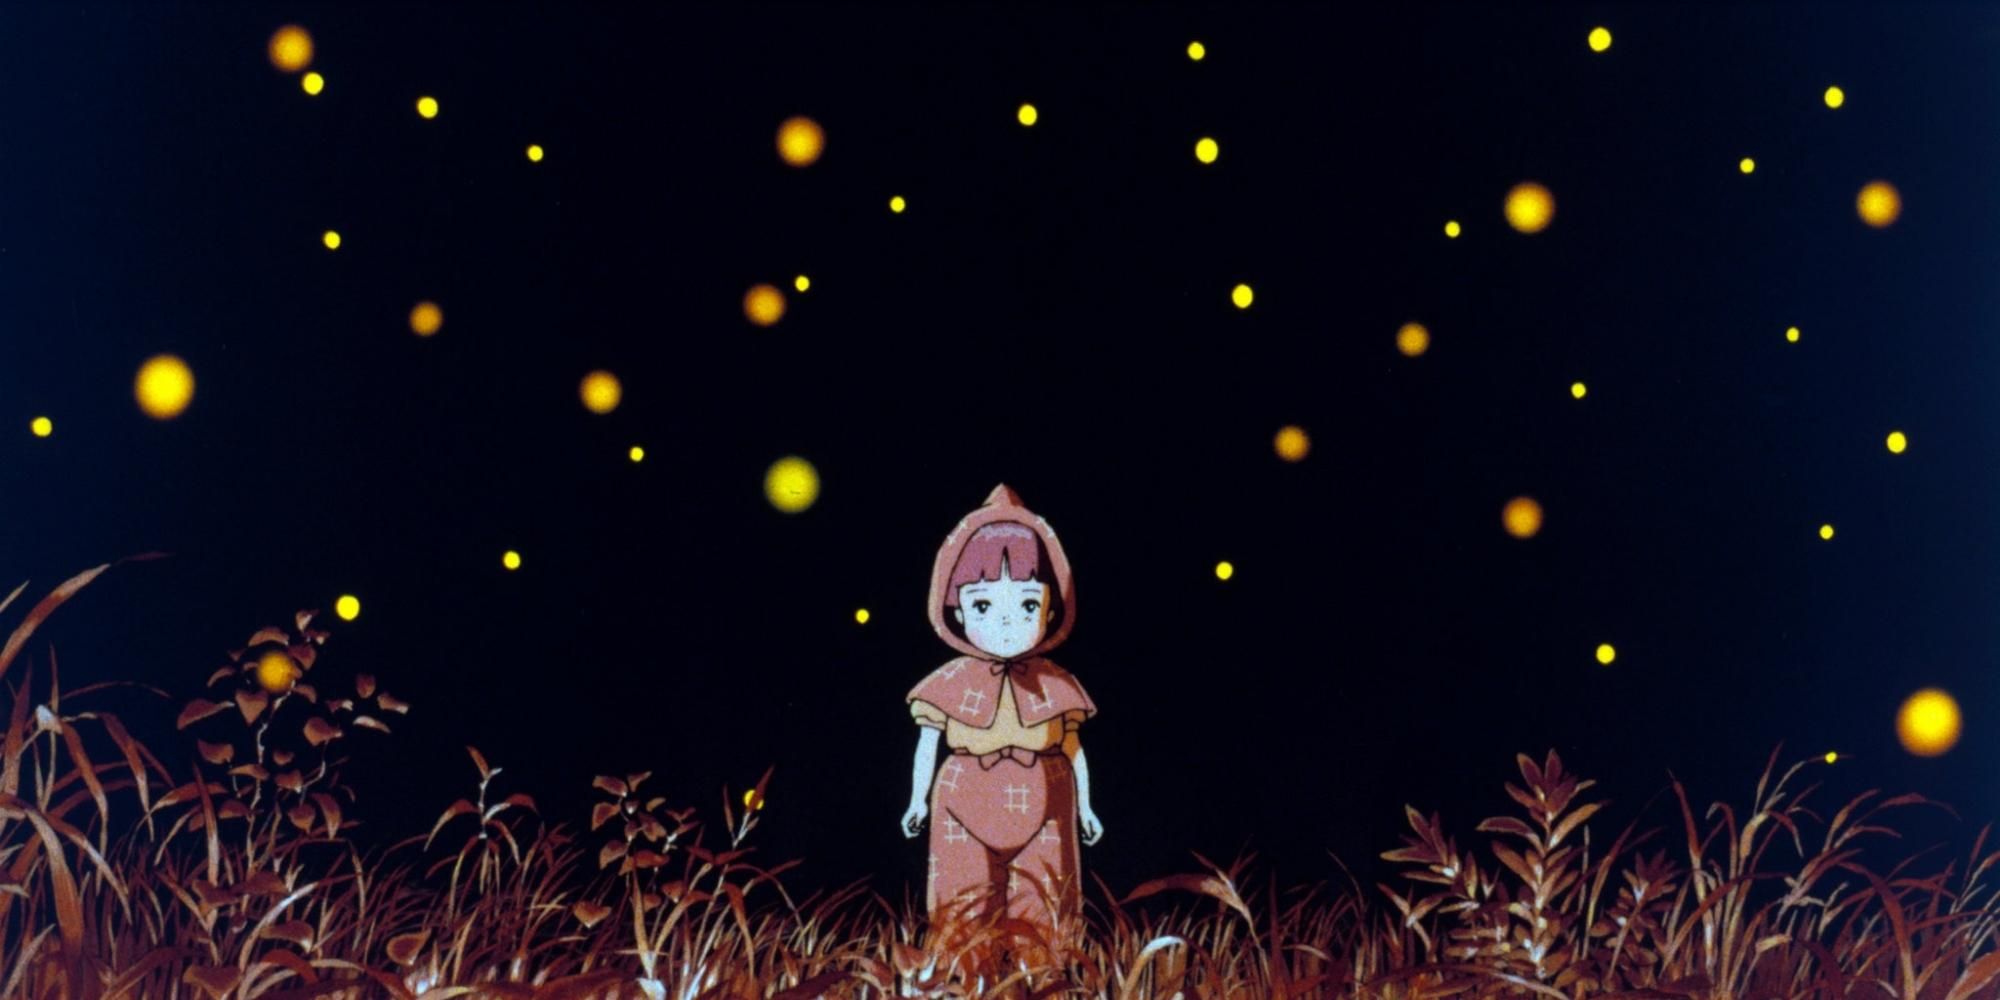 Setsuko in Grave of the Fireflies